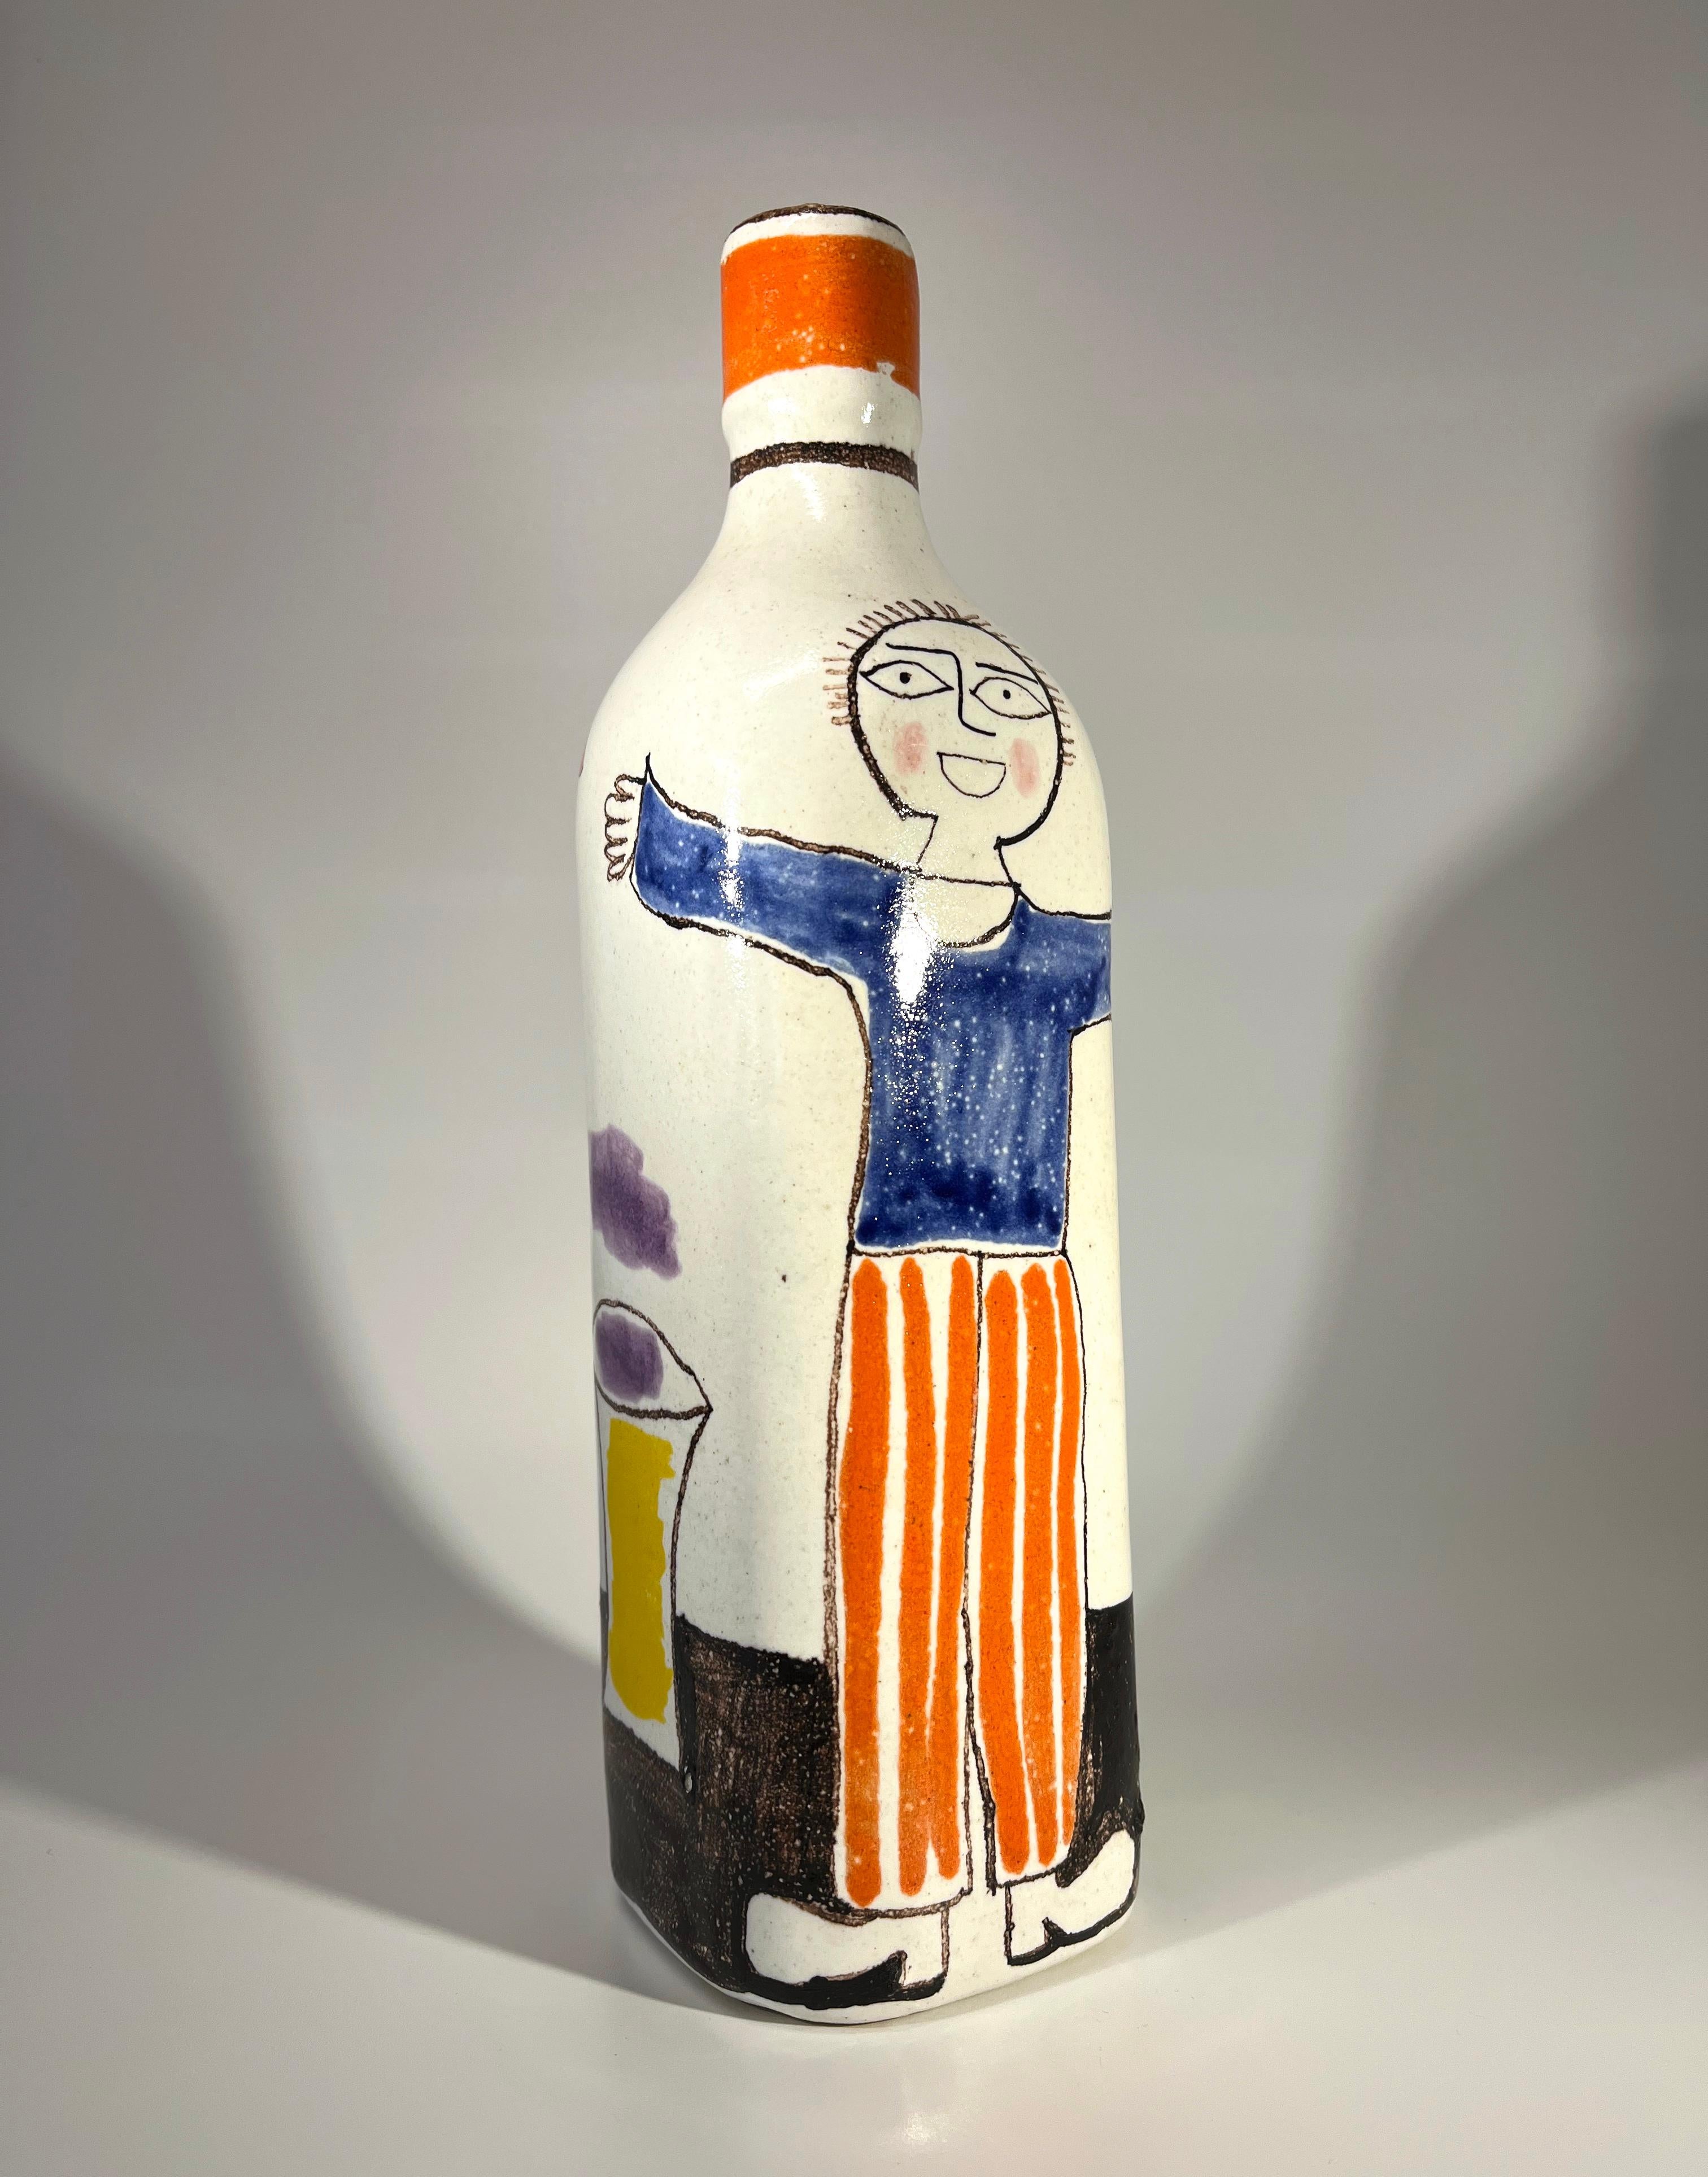 Endearing 'boy with arms outstretched' tall hand painted Italian ceramic bottle vase 
Square shaped 10 inch tall vase by DeSimone, Italy
Signed DeSimone Italy on the base
Circa 1960
Height 10 inch, Width 2.75 inch, Depth 2.75
In very good